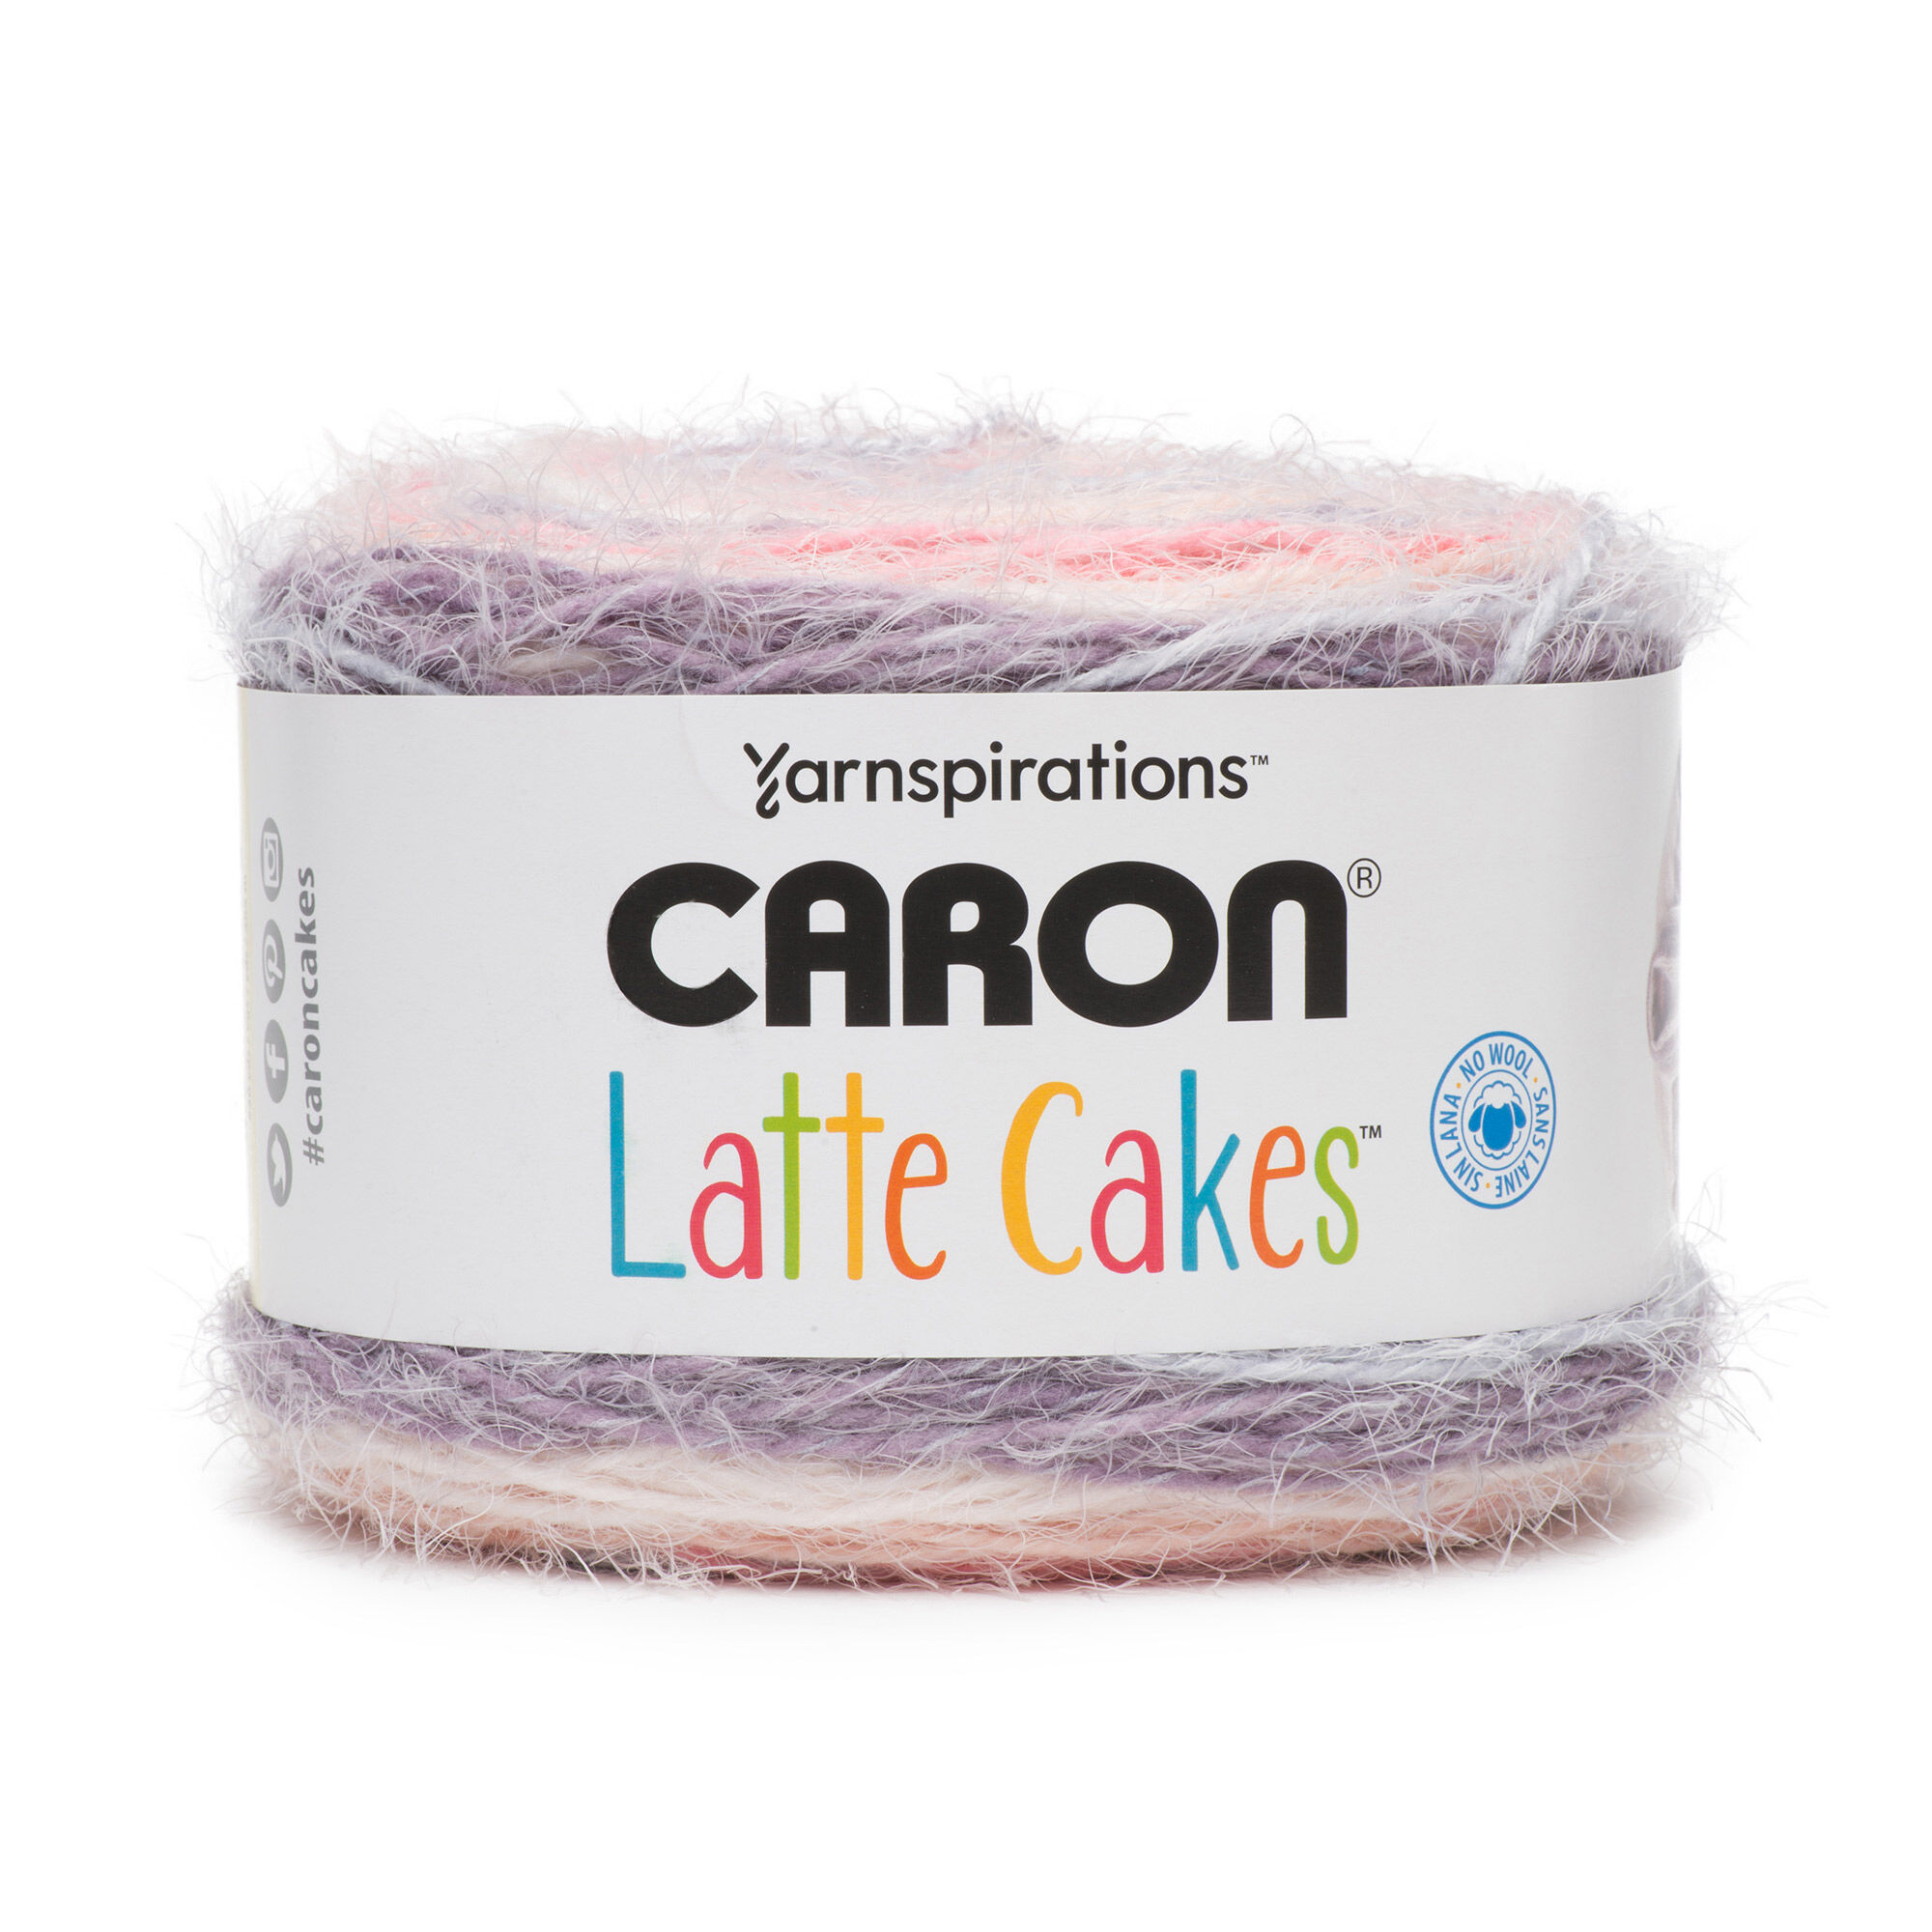 Caron Cotton Cakes Yarn in Nested Blues | 3.5 oz | Michaels